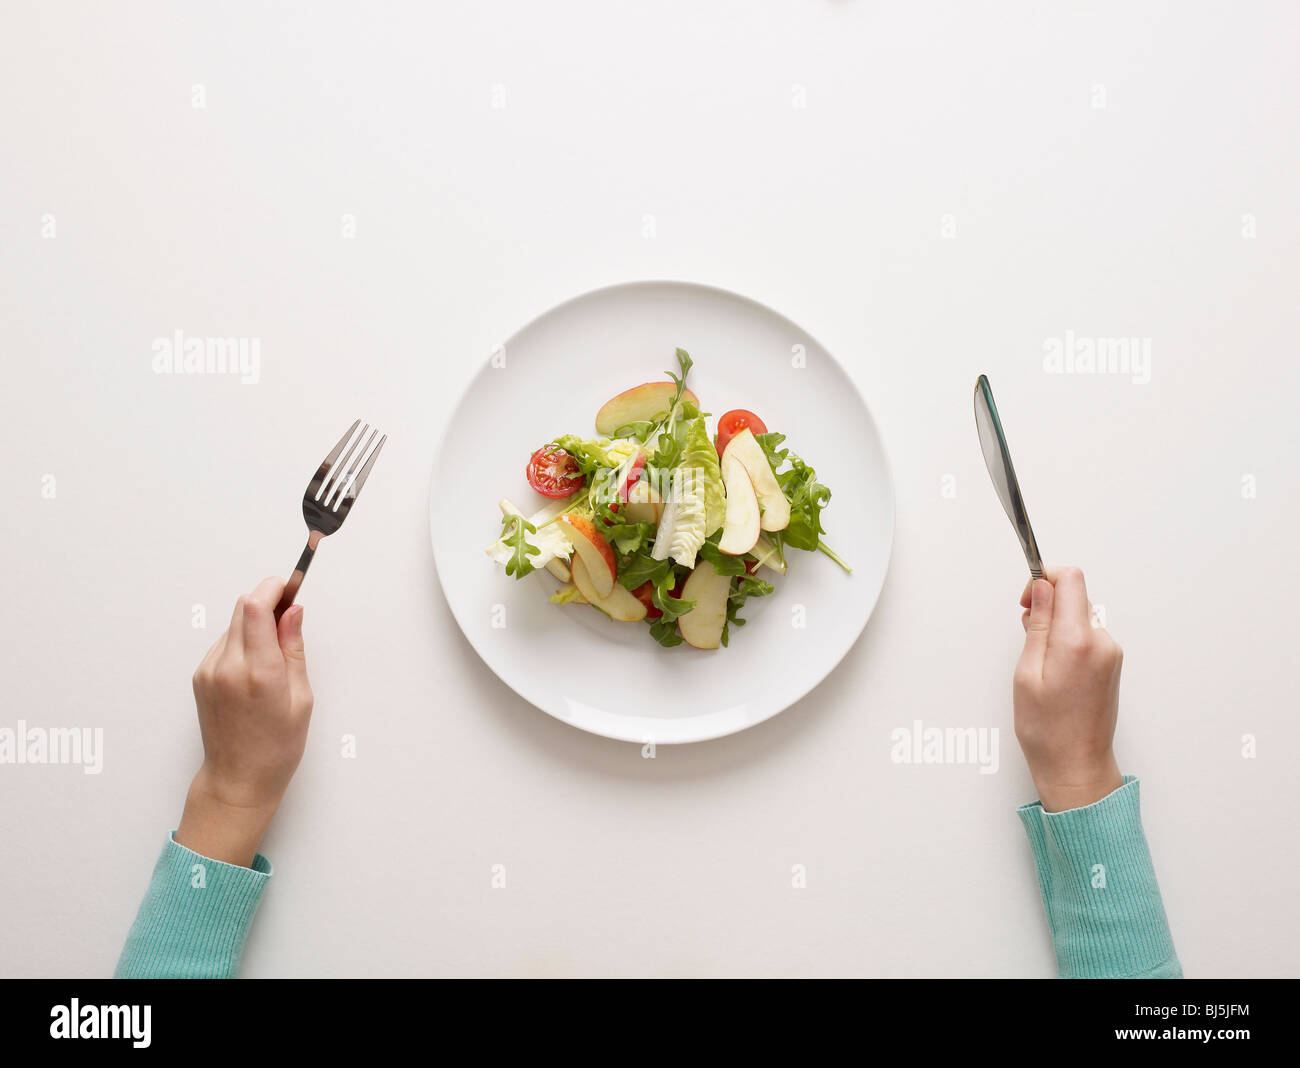 Hands by a plate of salad Stock Photo